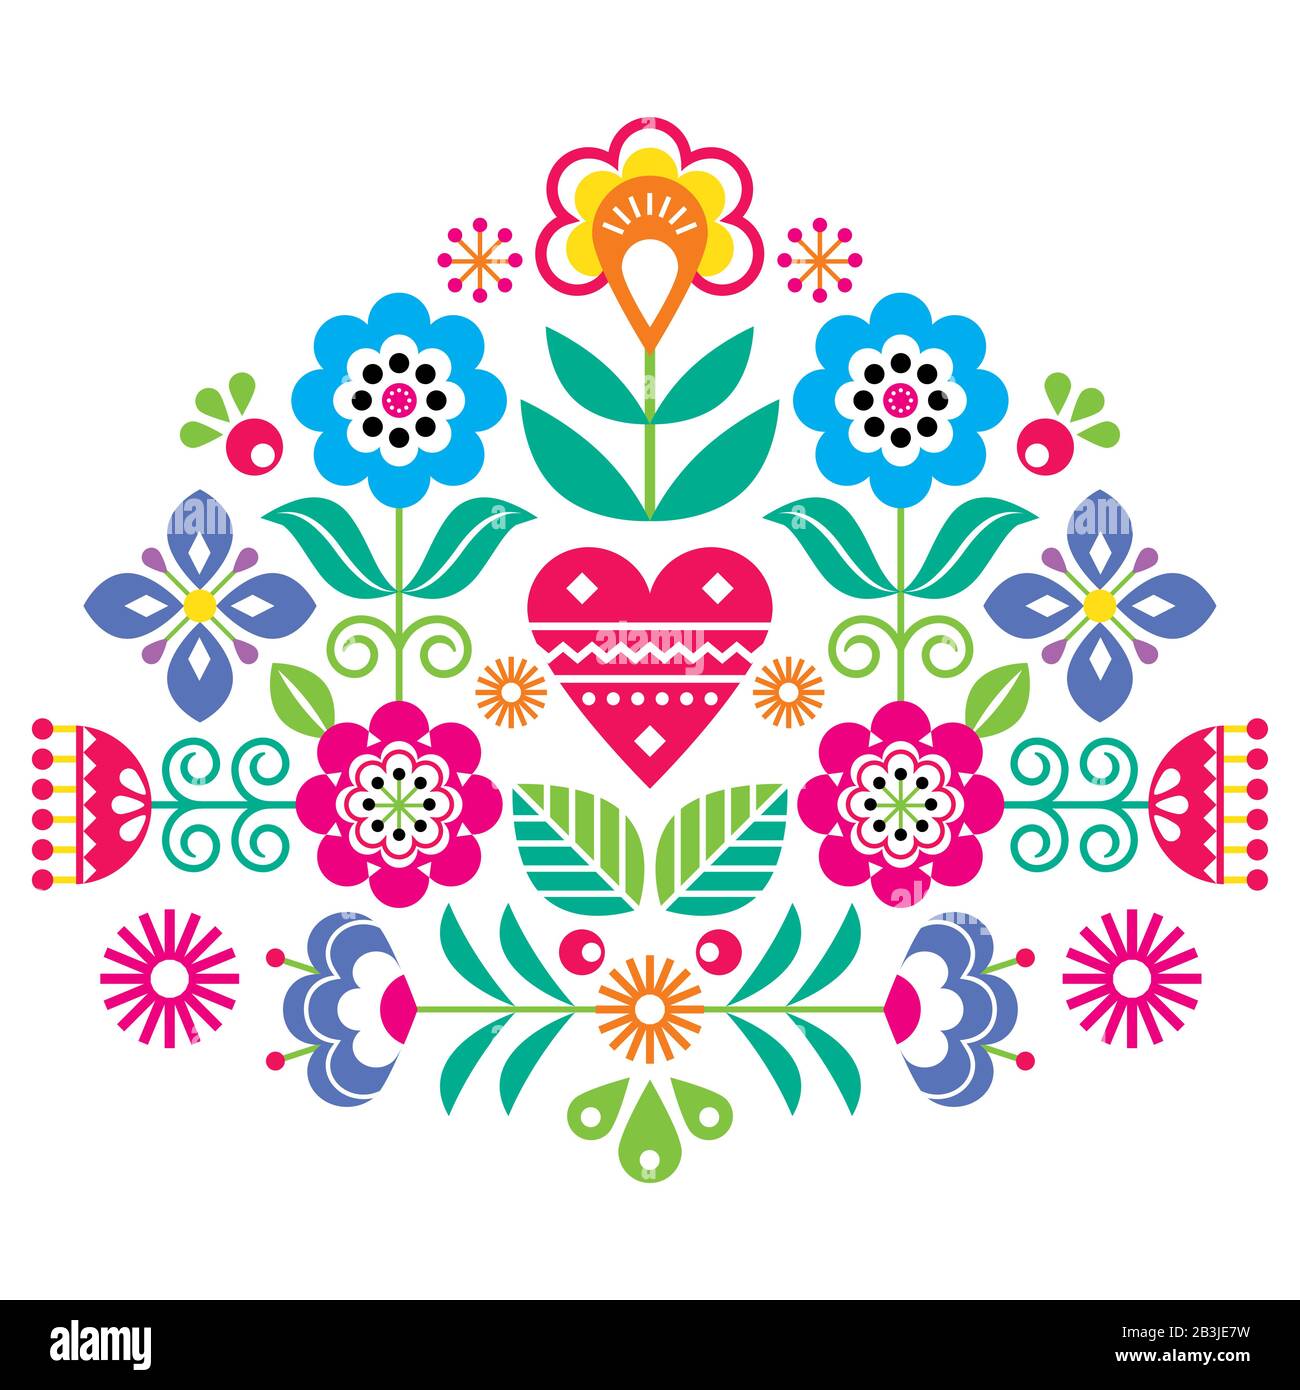 Scandinavian folk flowers vector design, cute spirng floral pattern inspired by traditional embroidery from Sweden, Norway and Denmark Stock Vector